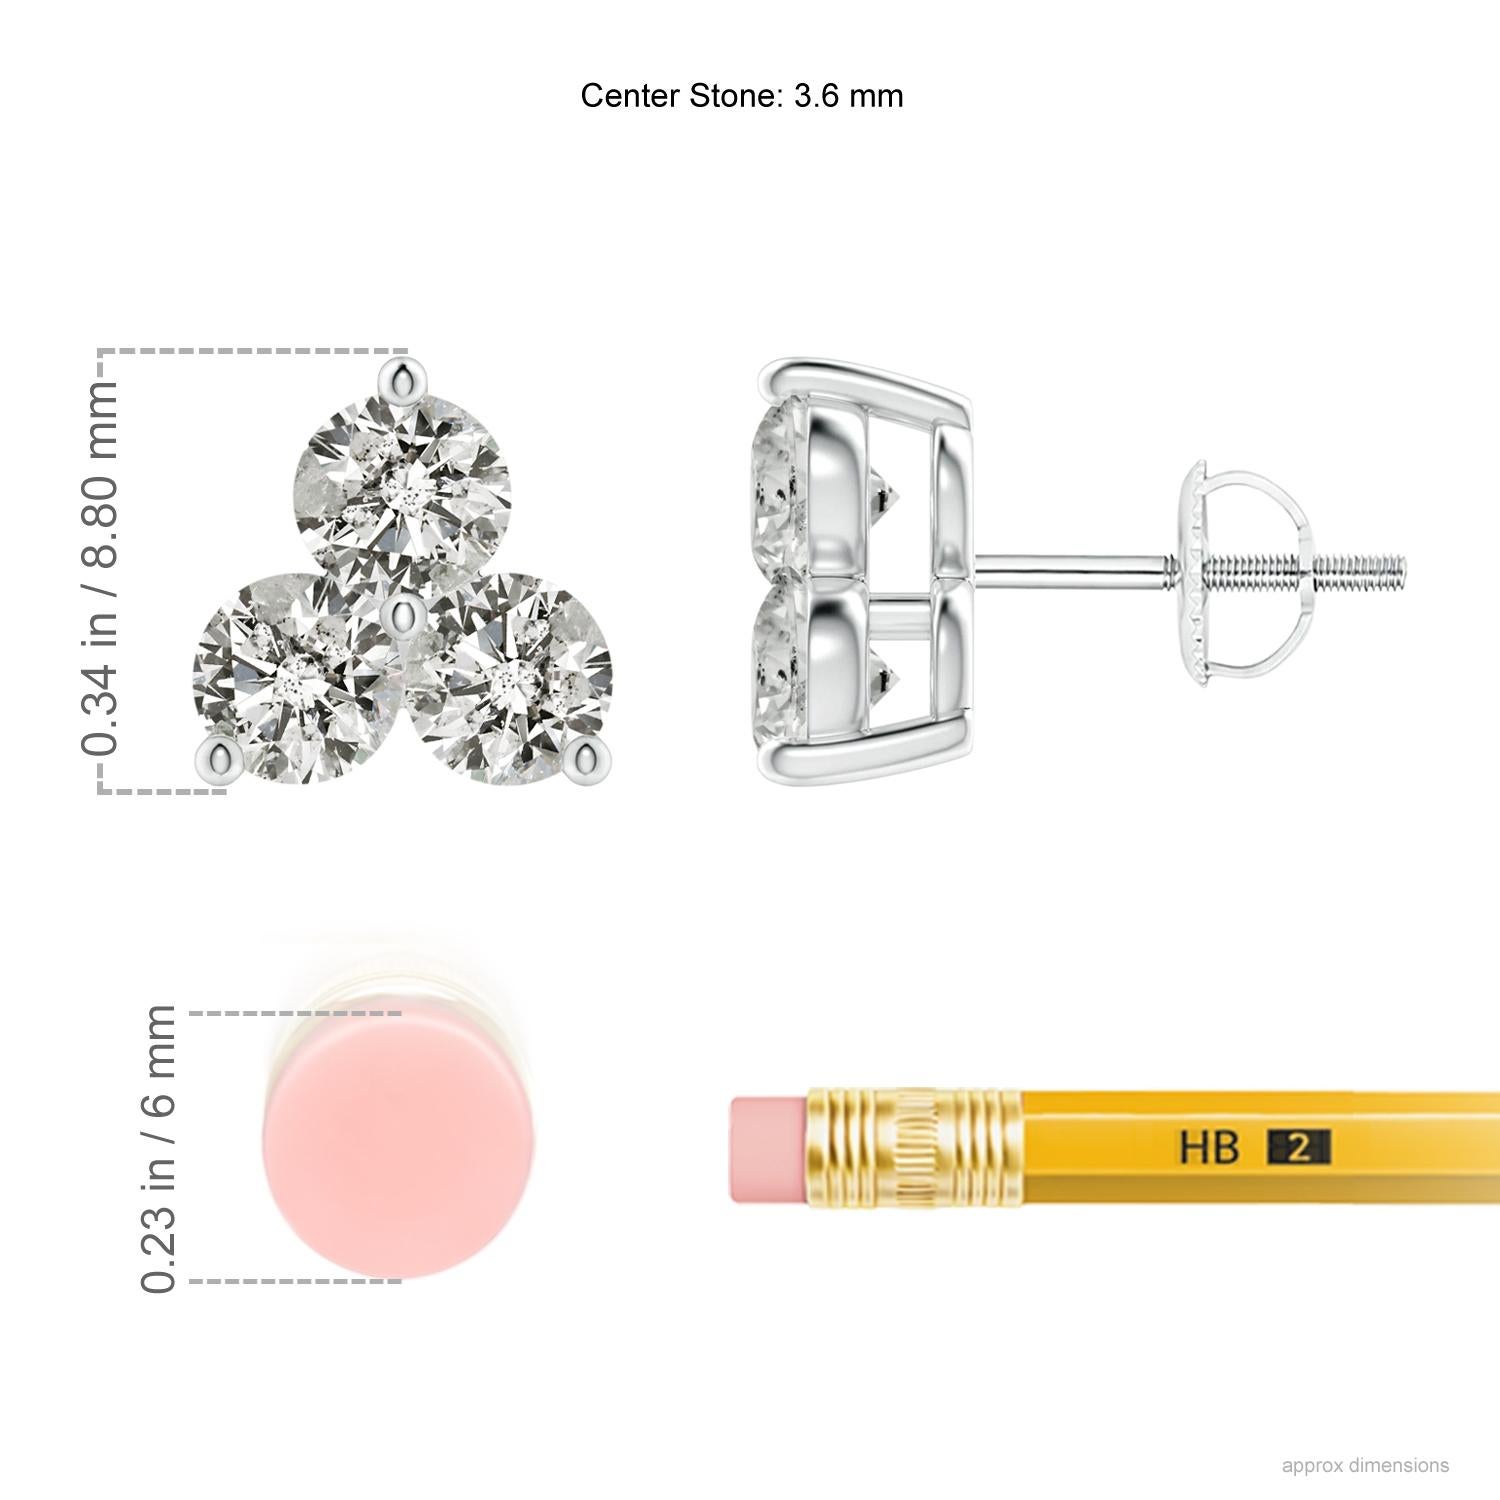 Trios of sparkling round diamonds are held in a shared prong setting to look like fascinating clusters on these stud earrings. Their glimmering white allure will enchant you and accentuate your look in a beautiful way. Crafted in 14K white gold,